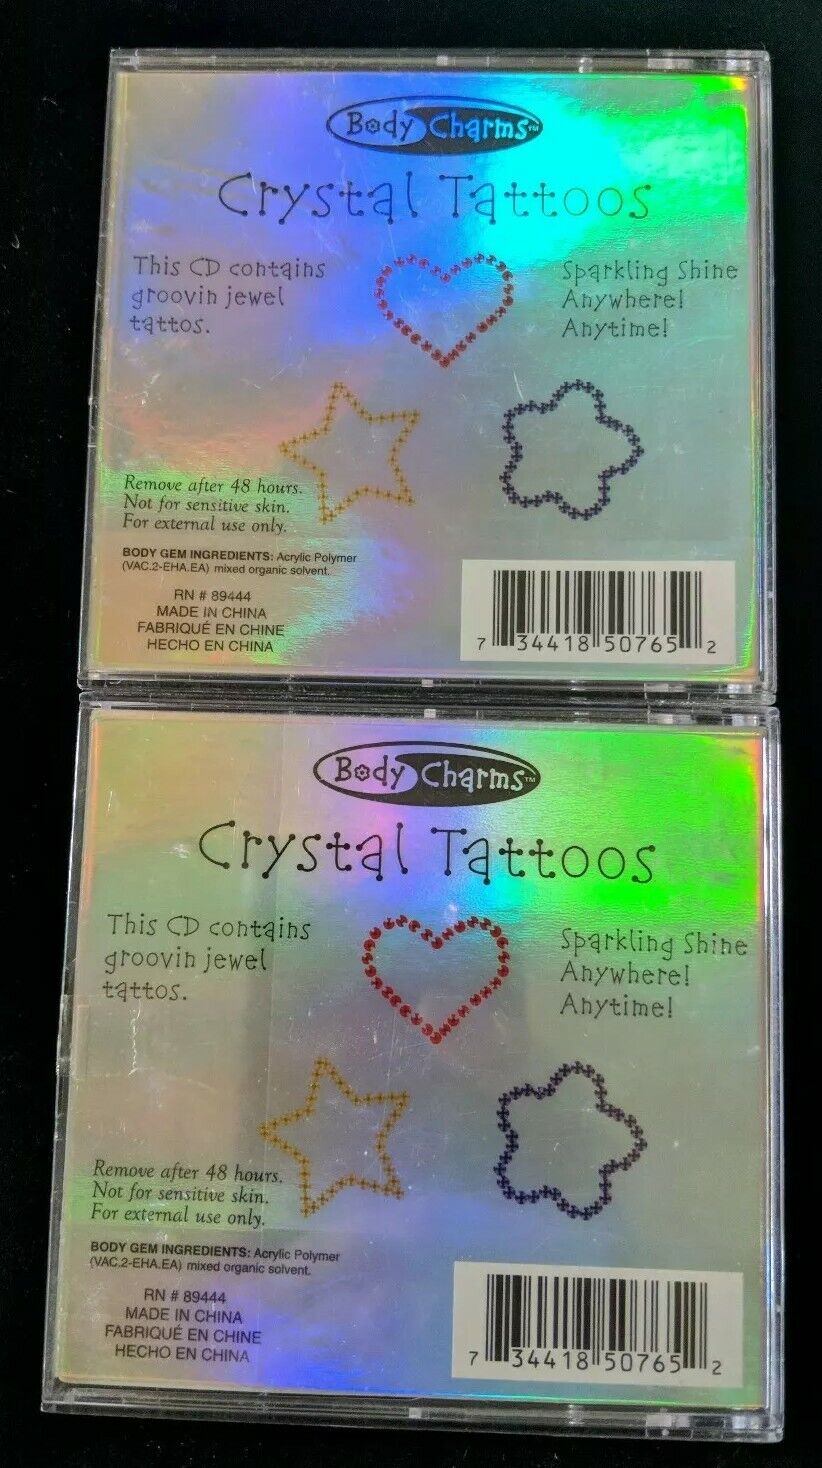 Body Charms Crystal Tattoos Adhesive Stick-on Skin Jewelry Summer Beach Dancing Unbranded Does Not Apply - фотография #2